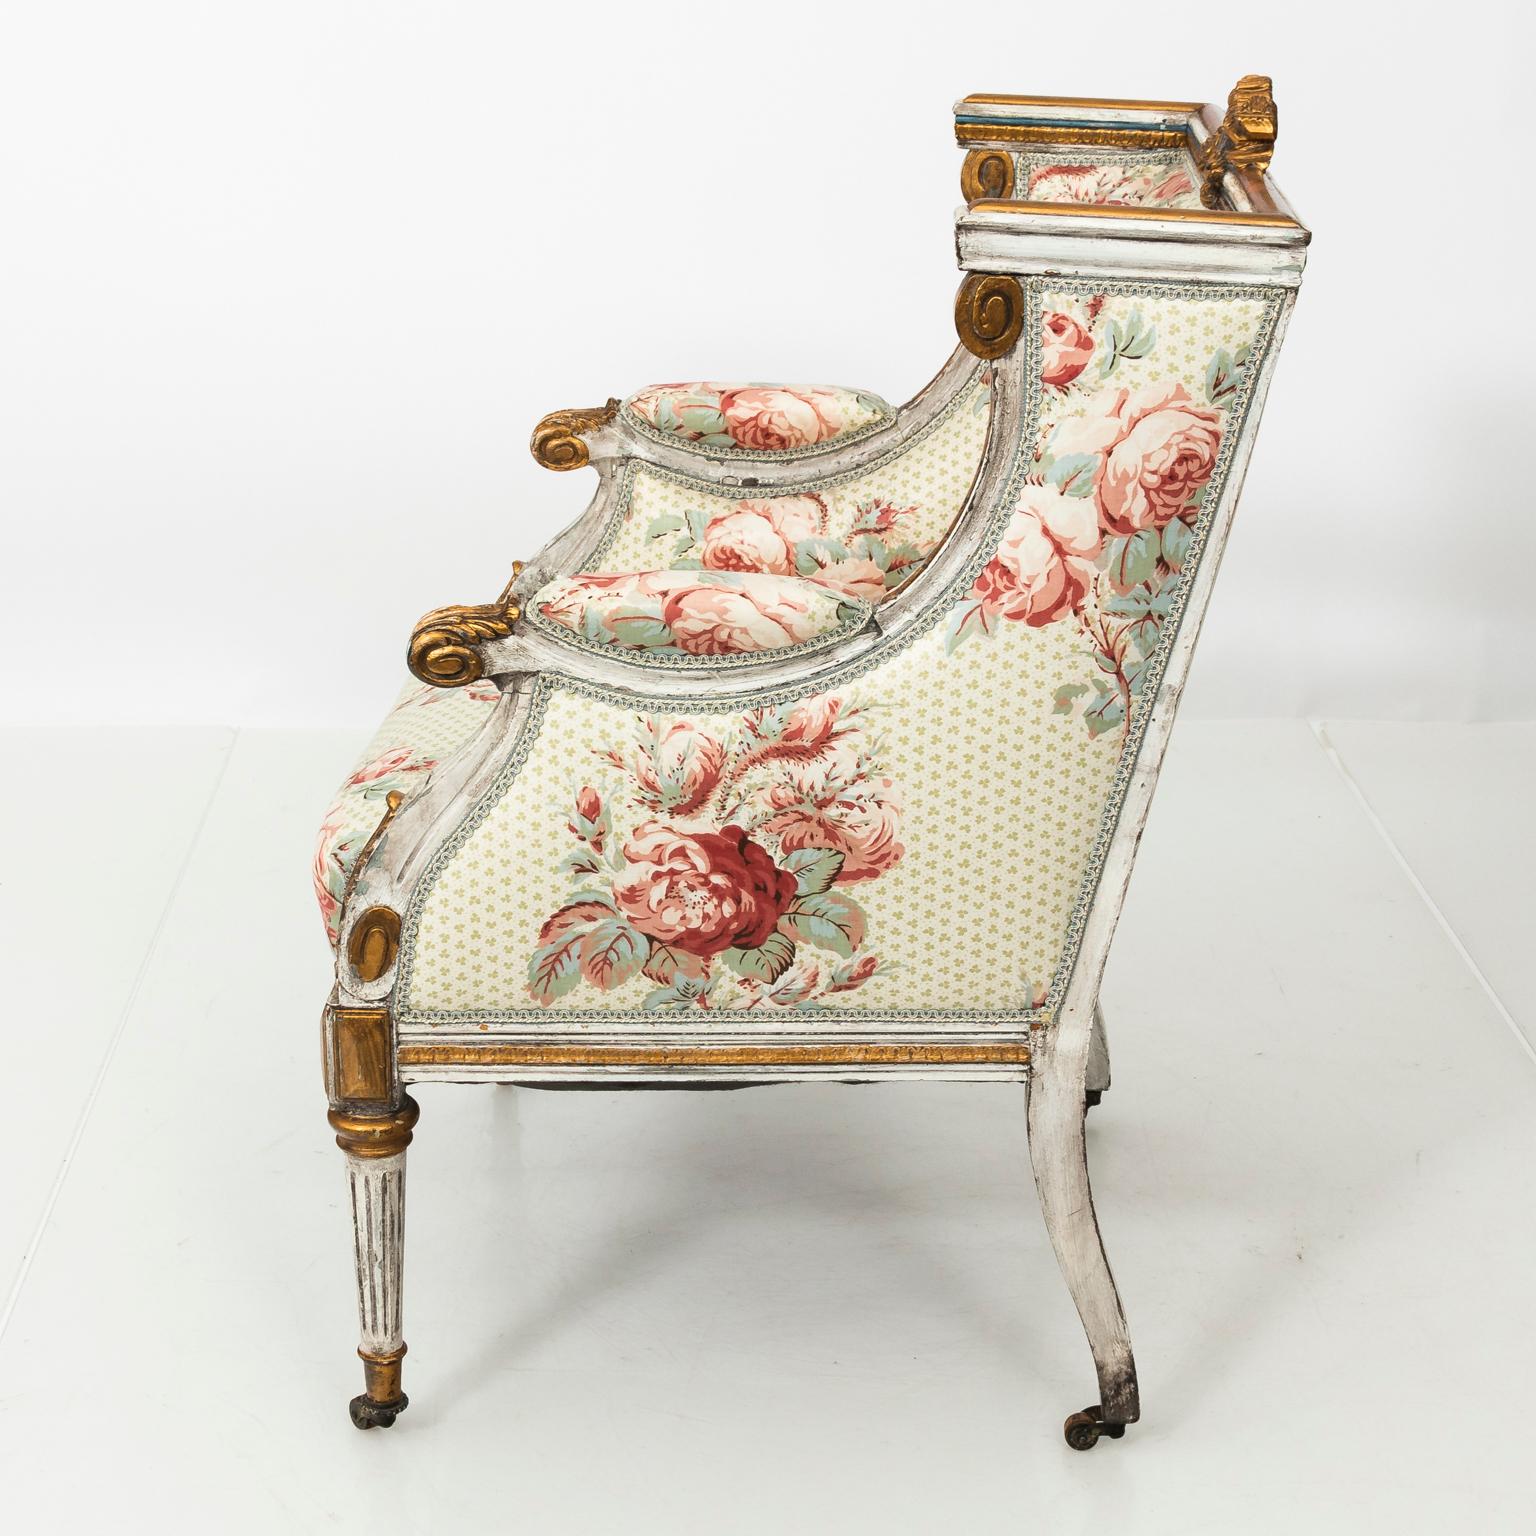 1920-1930 French neoclassical style armchair in Rose Cummings Chinz with original paint and gilded accents on castors.
 